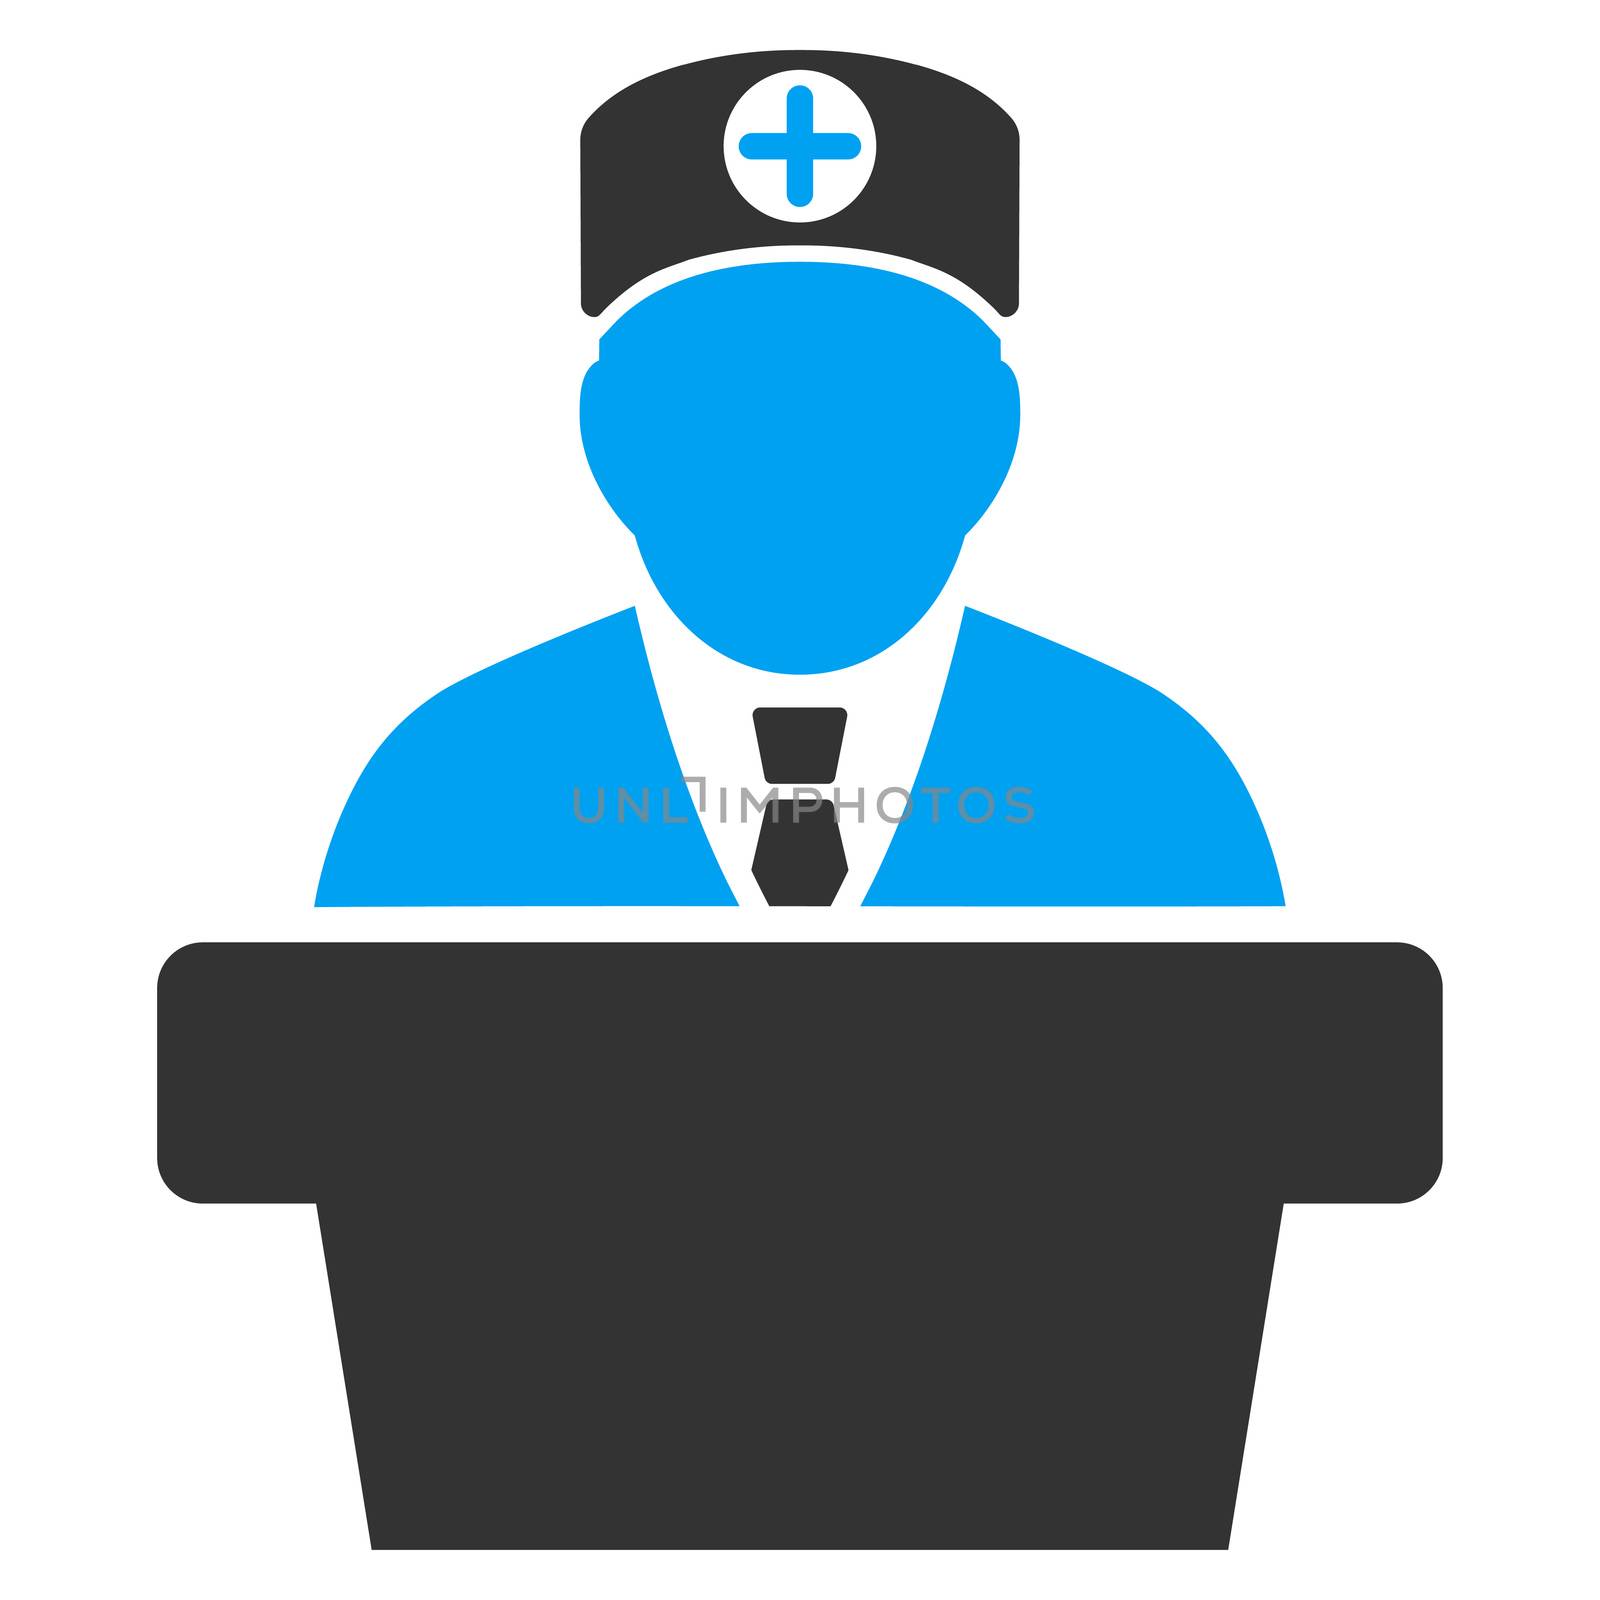 Medical Official Lecture raster icon. Style is bicolor flat symbol, blue and gray colors, rounded angles, white background.